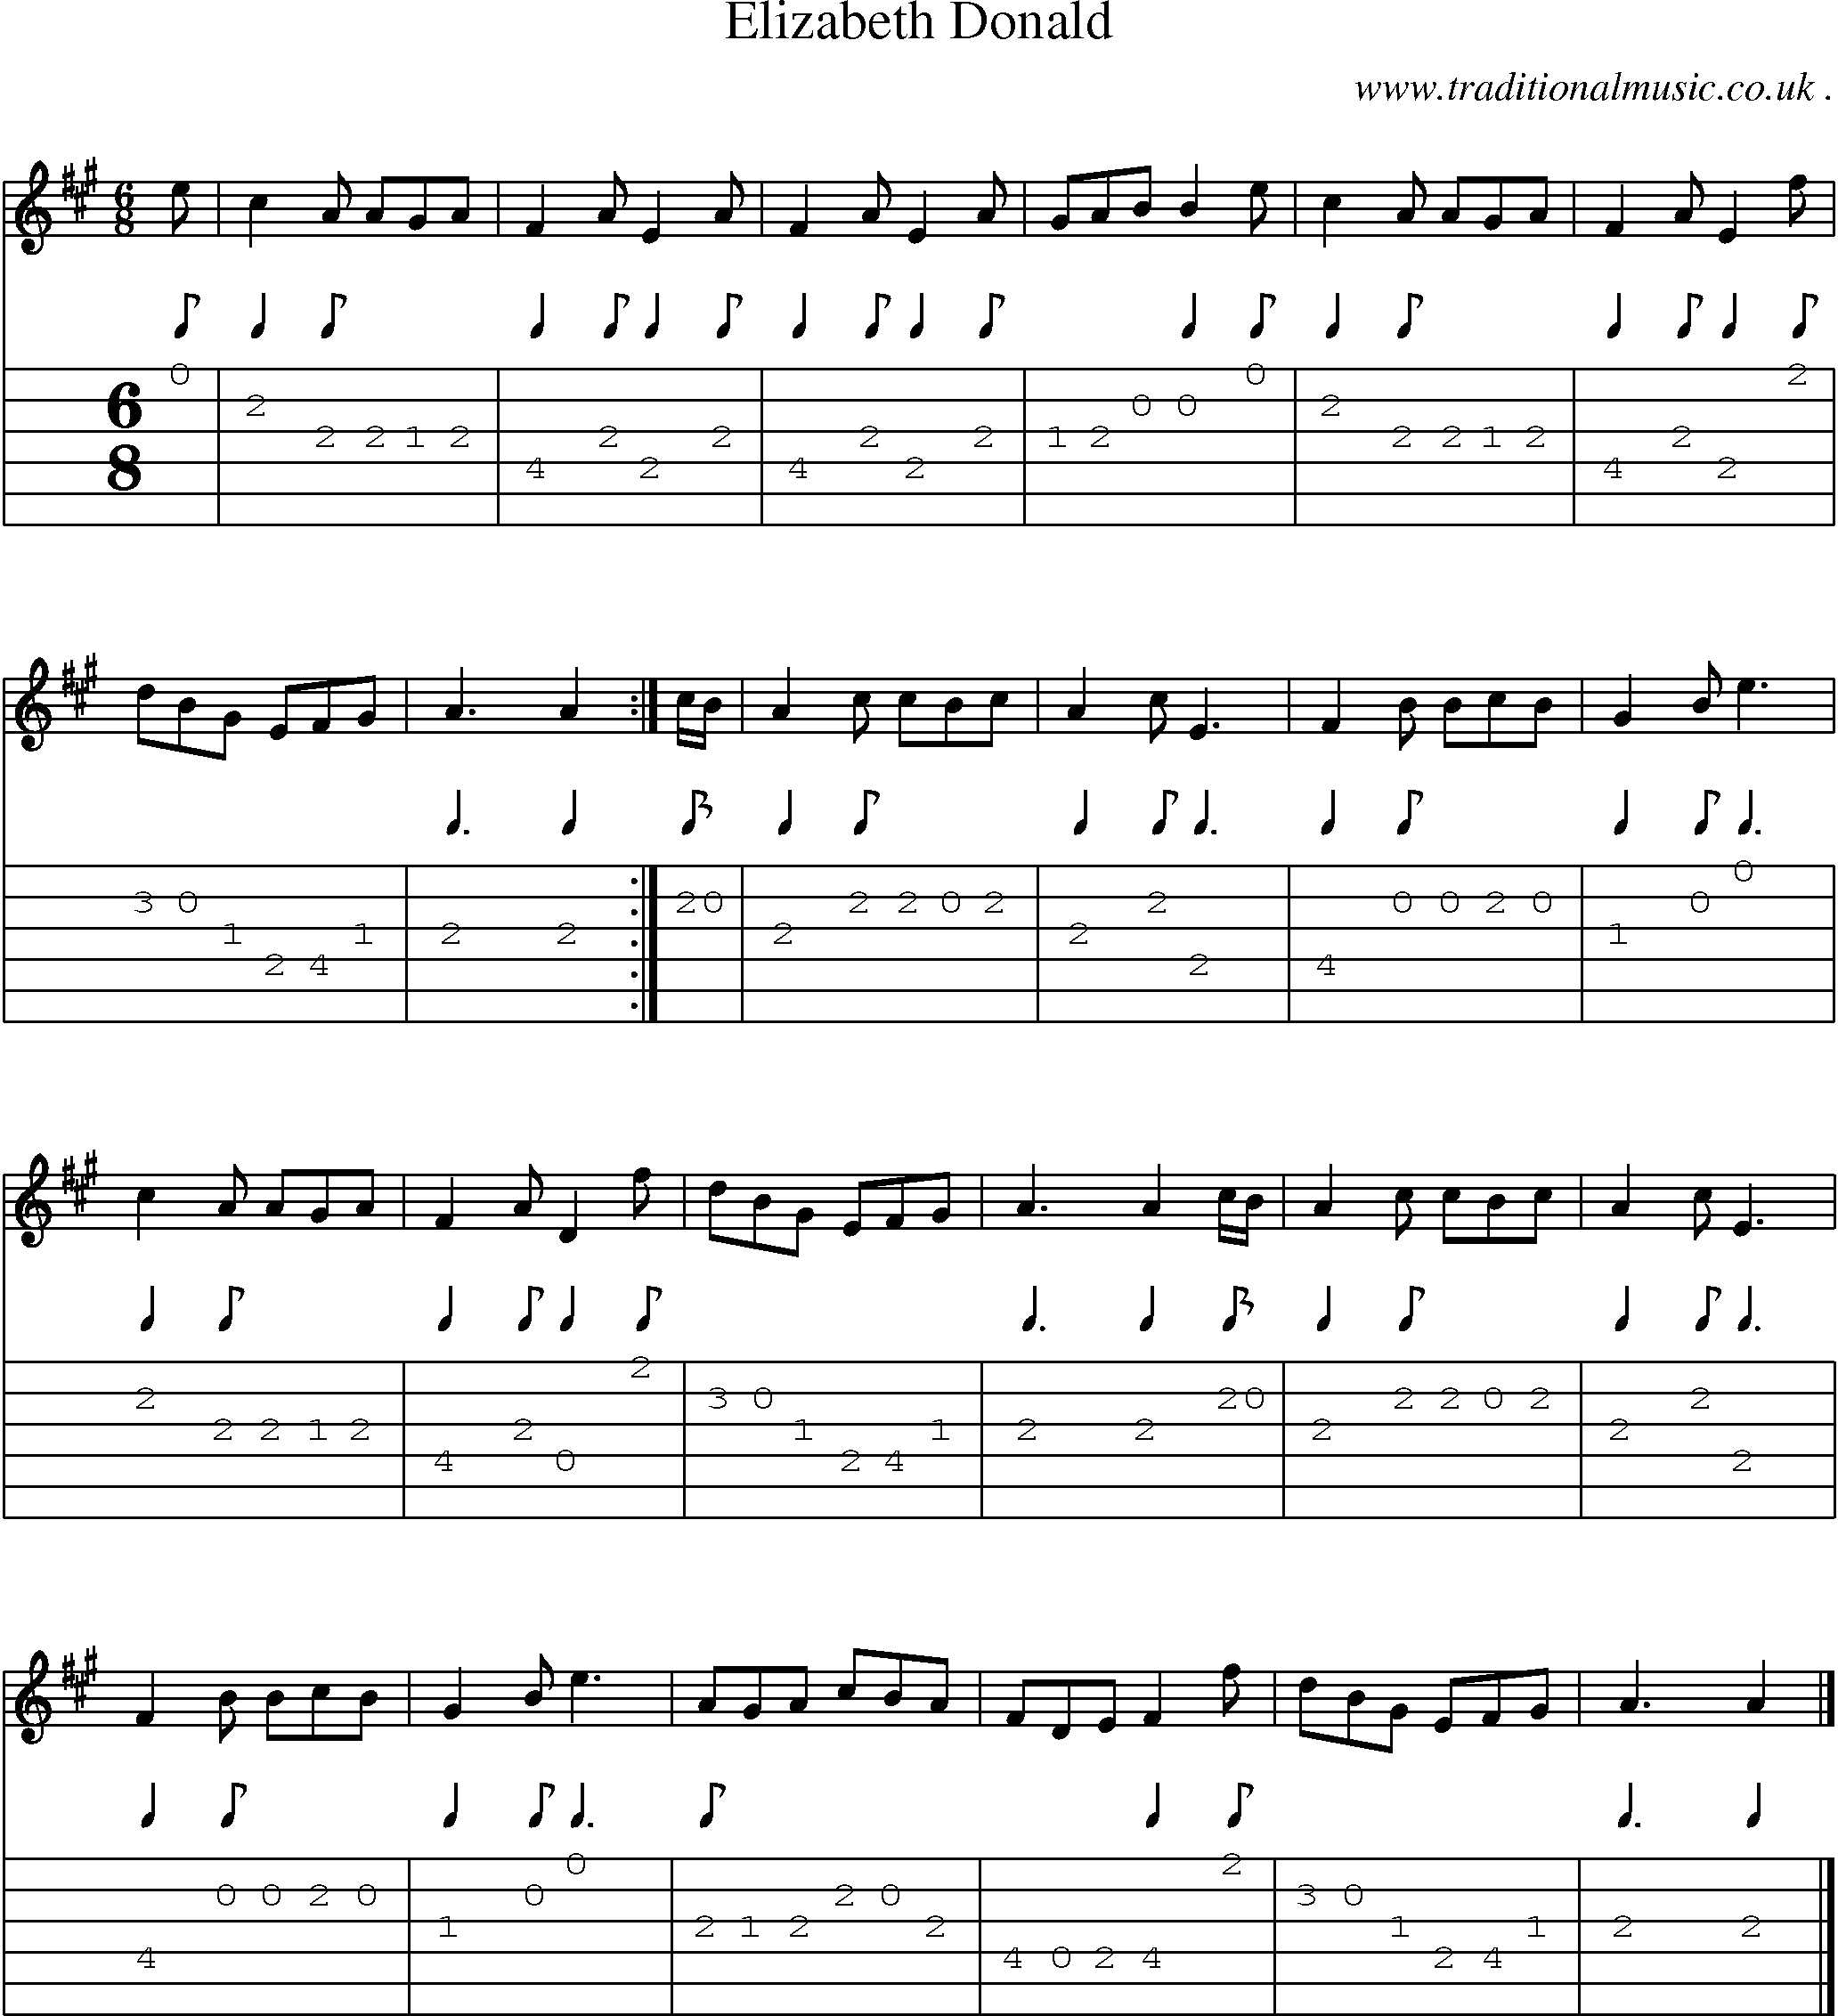 Sheet-music  score, Chords and Guitar Tabs for Elizabeth Donald